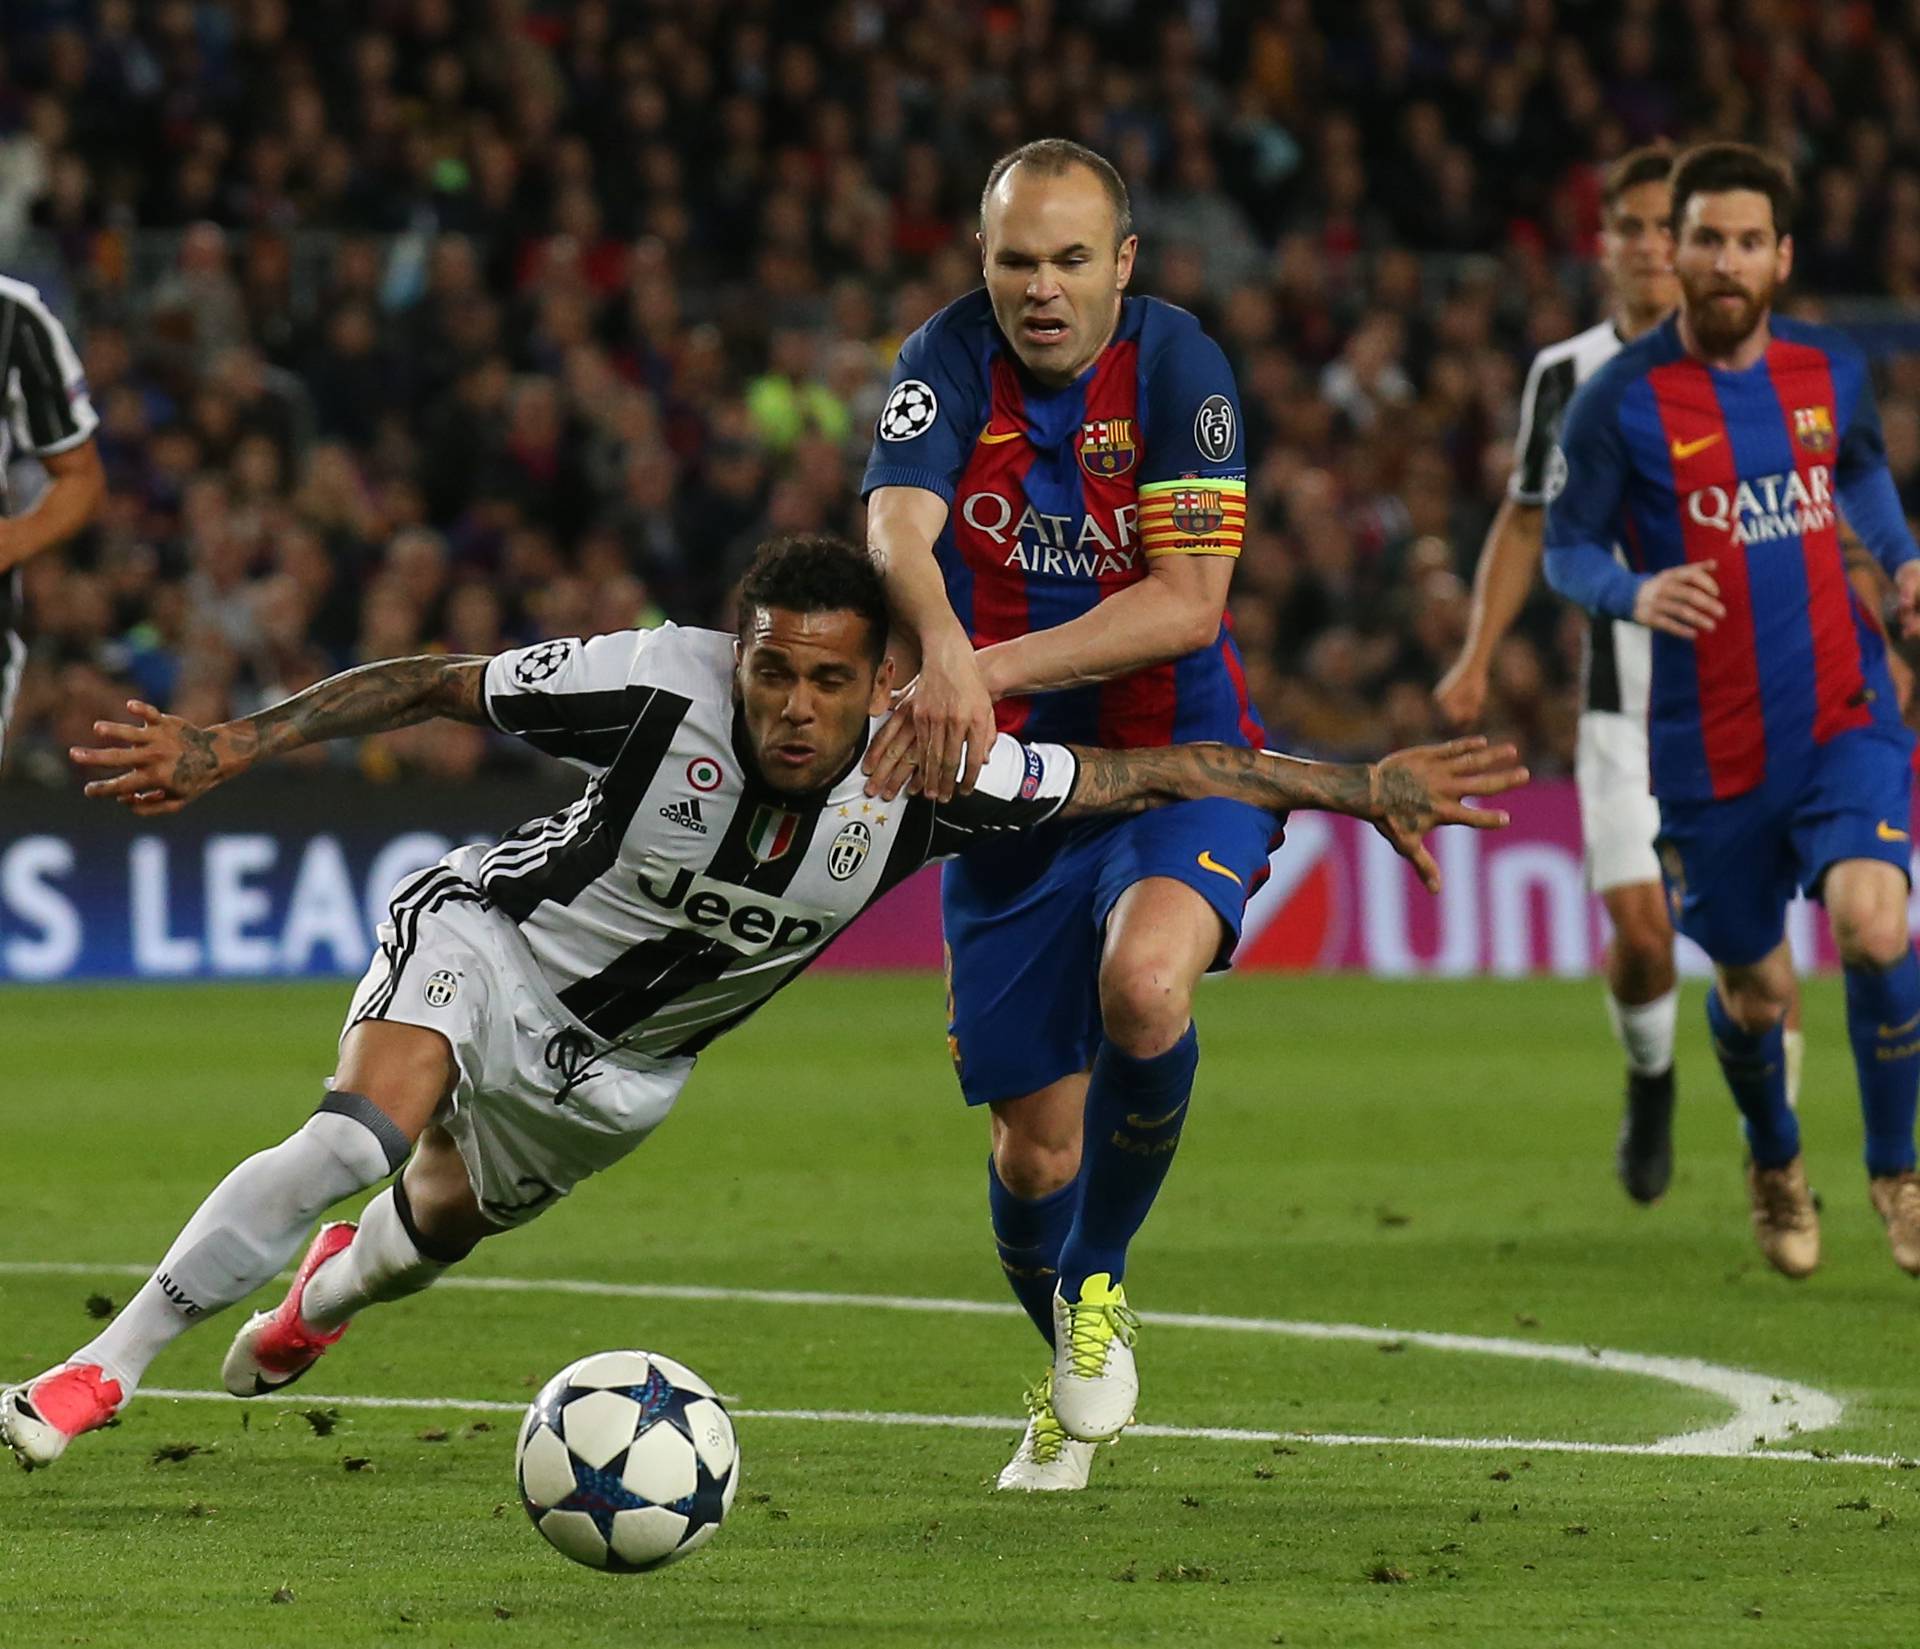 Barcelona's Andres Iniesta in action with Juventus' Dani Alves